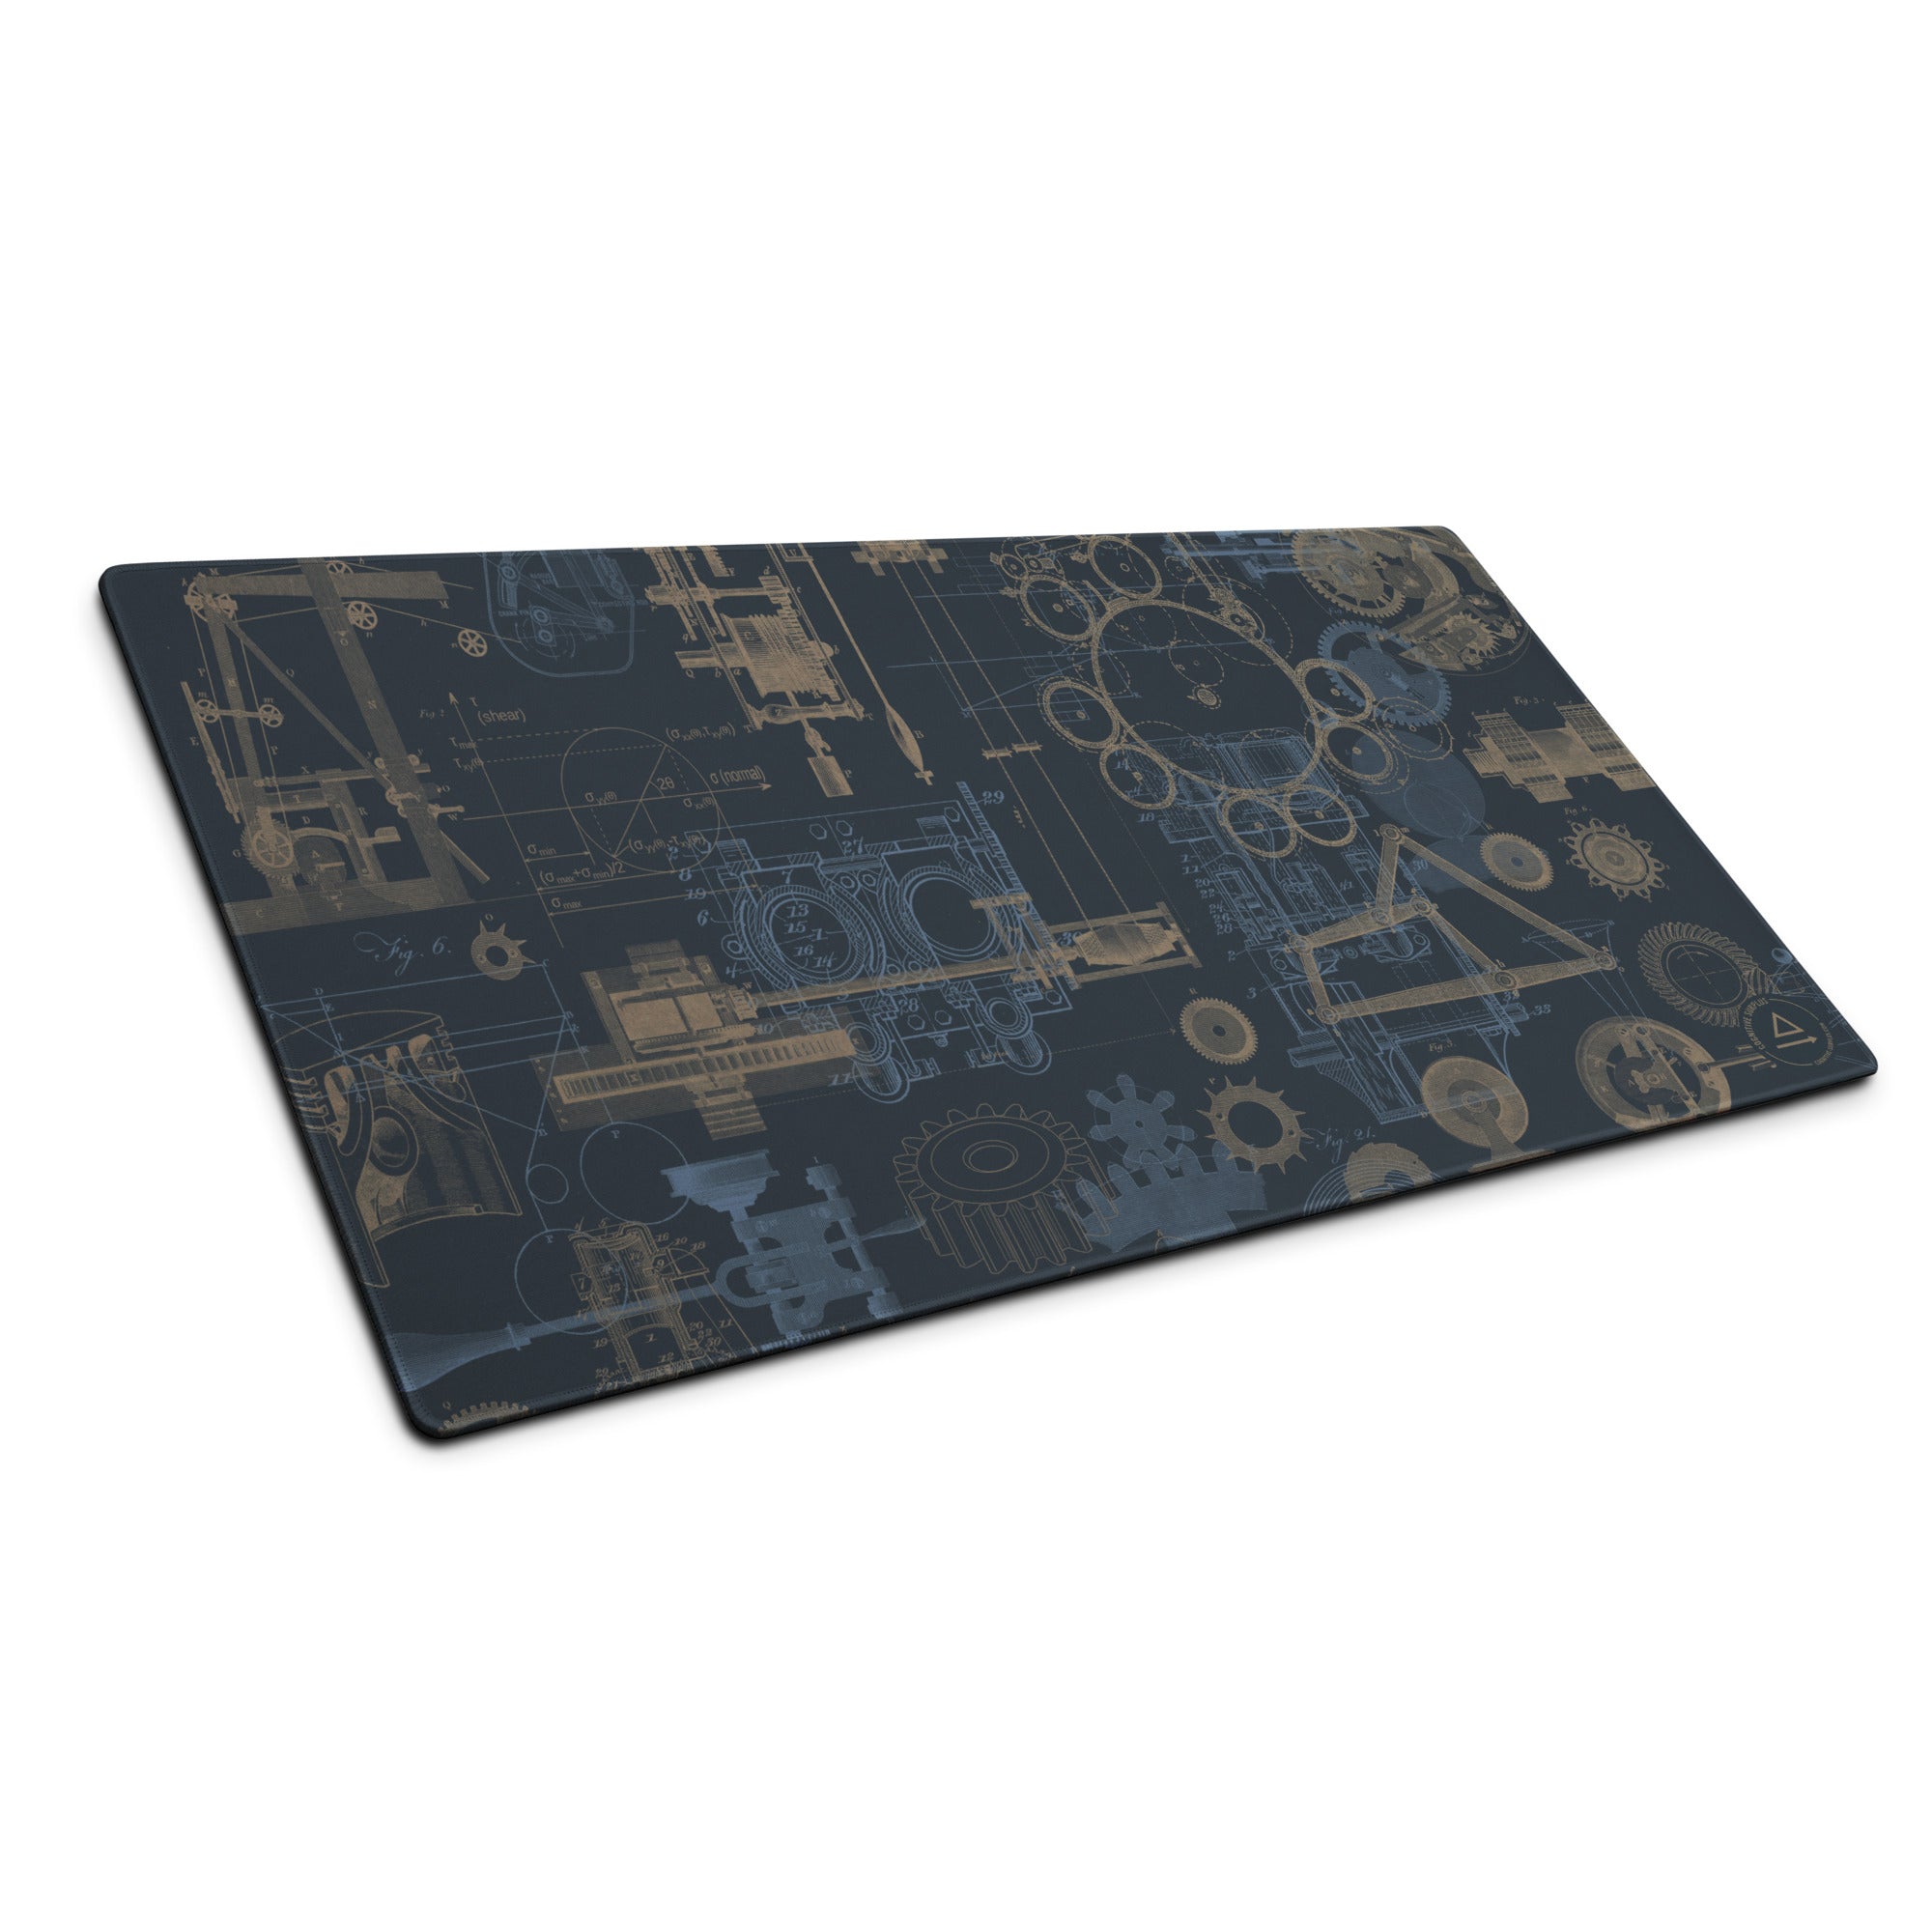 gaming-mouse-pad-white-36x18-front-65725933544c8.jpg